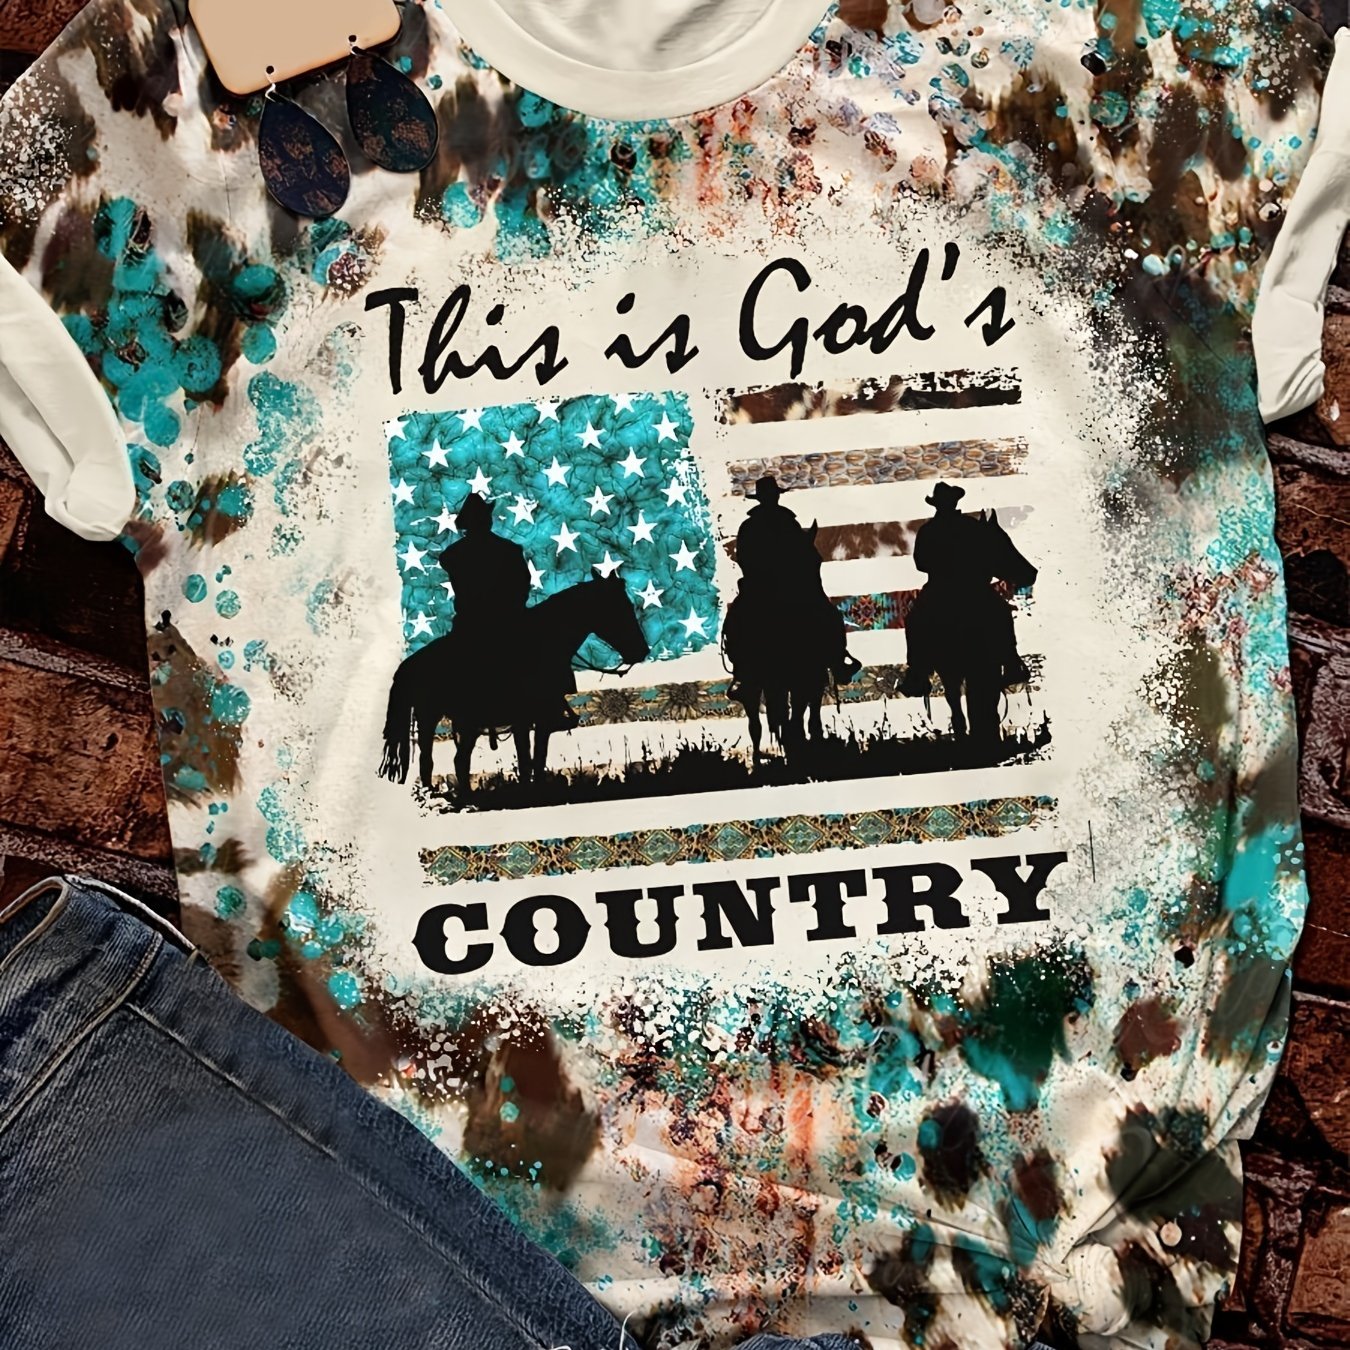 This Is God Country Letter Print T-shirt, Casual Vintage Crew Neck Short Sleeve T-shirt, Women's Clothing